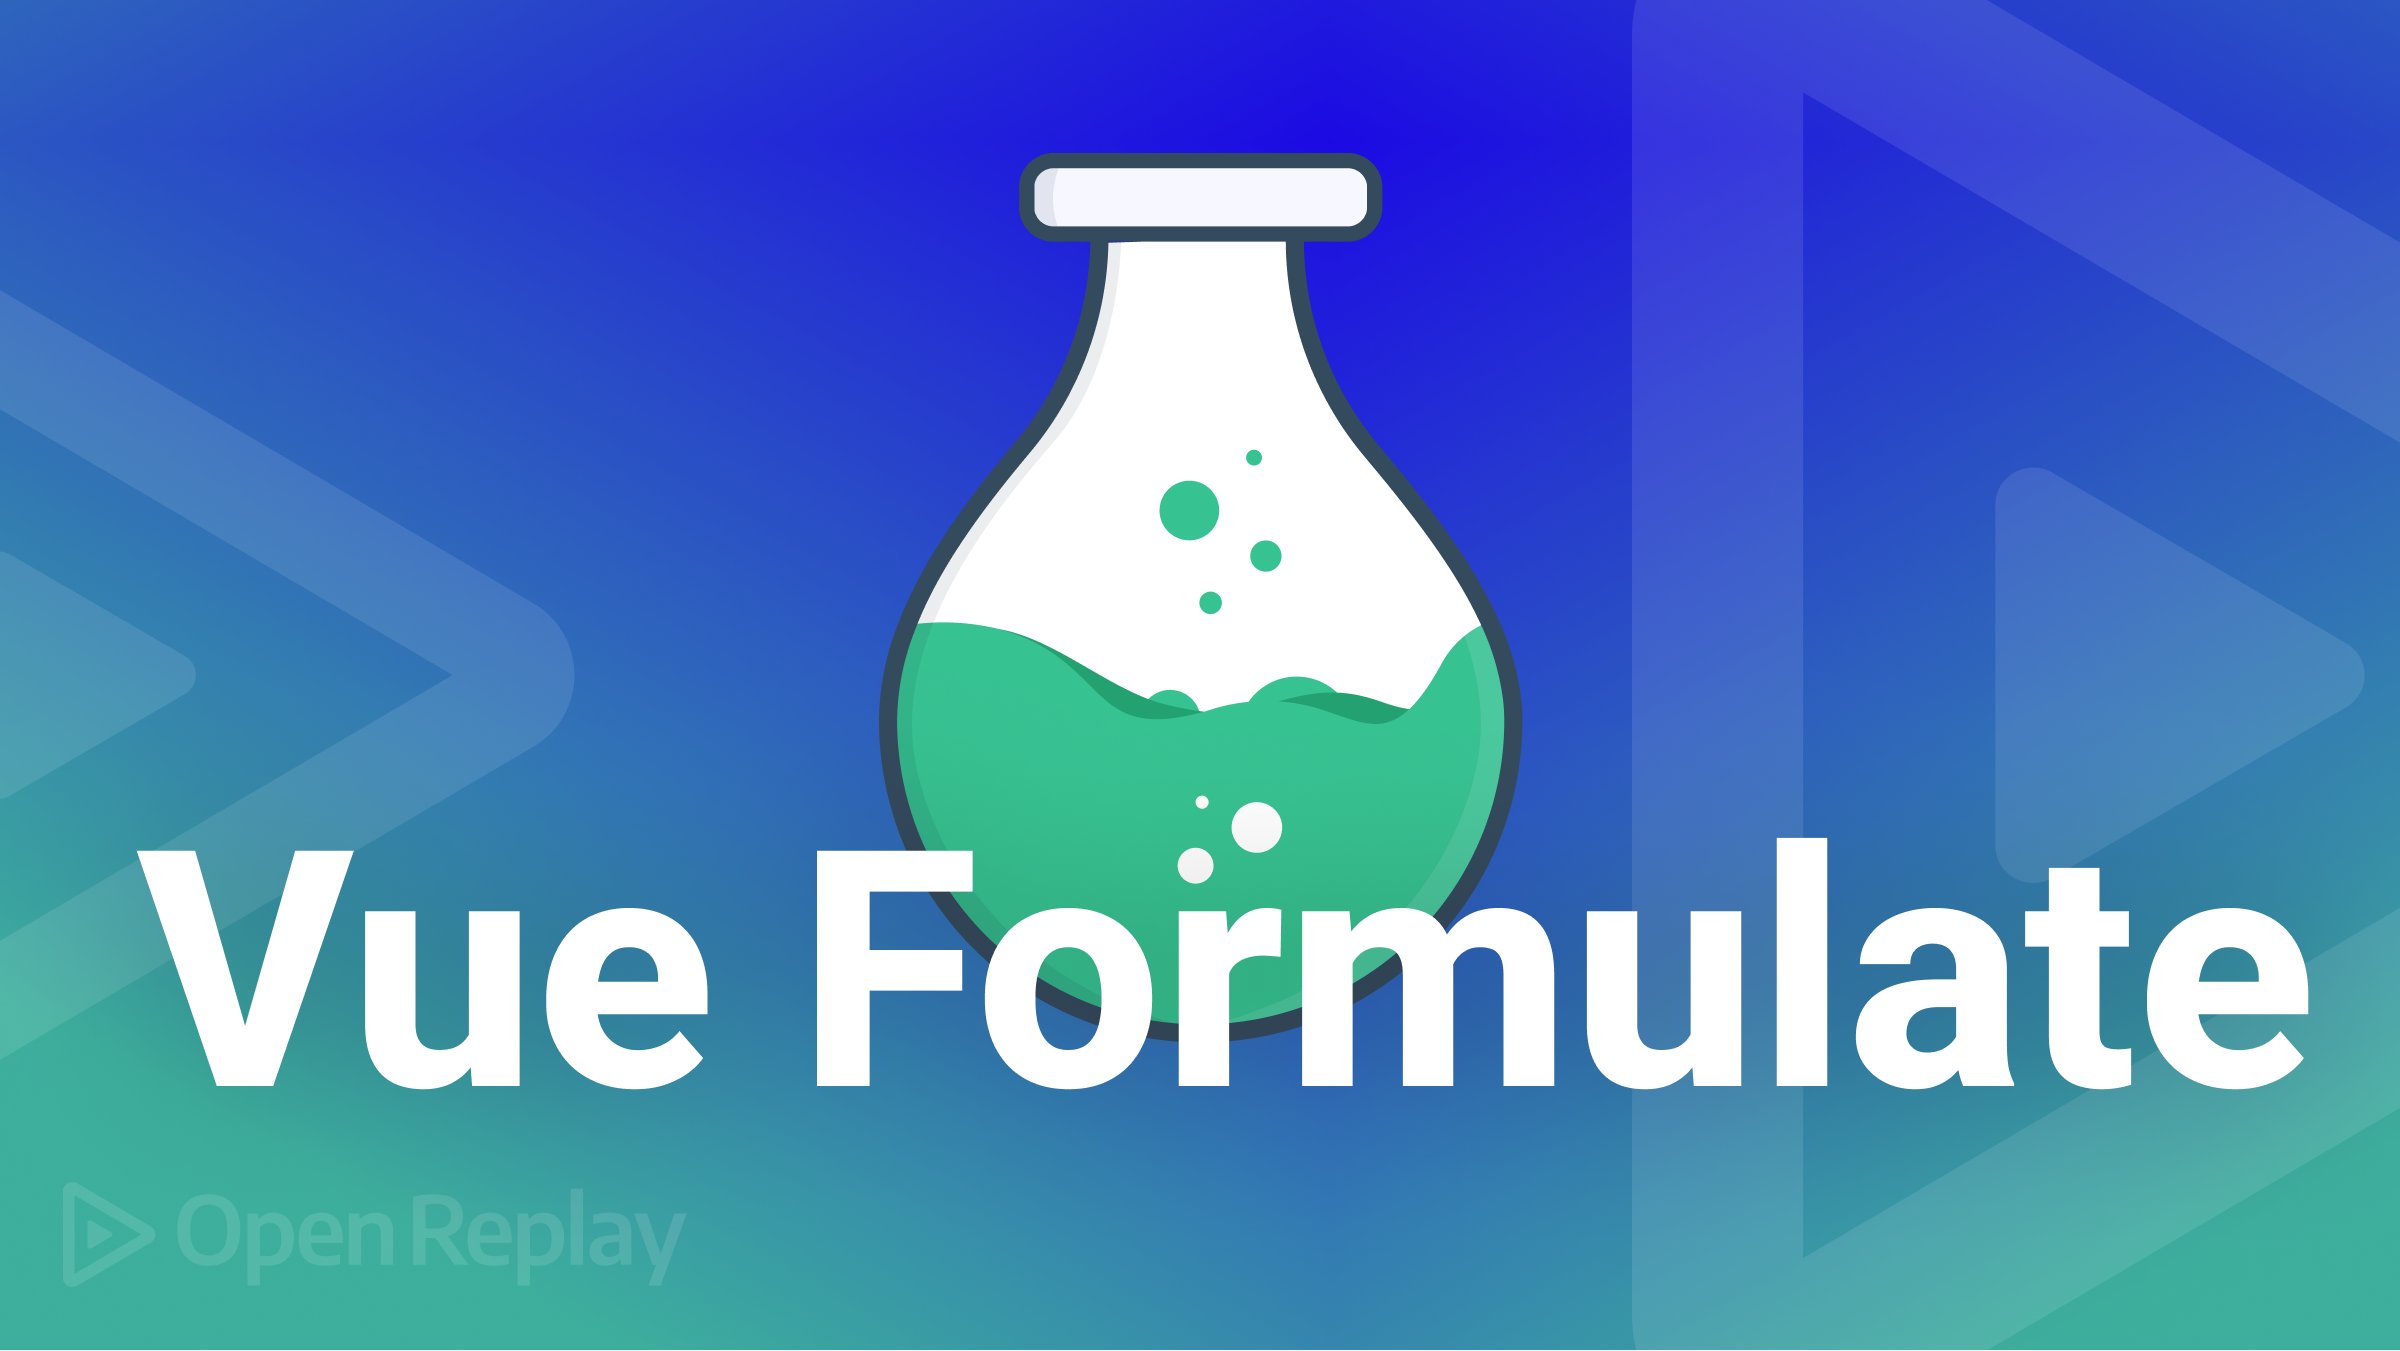 Validating Forms with Vue Formulate